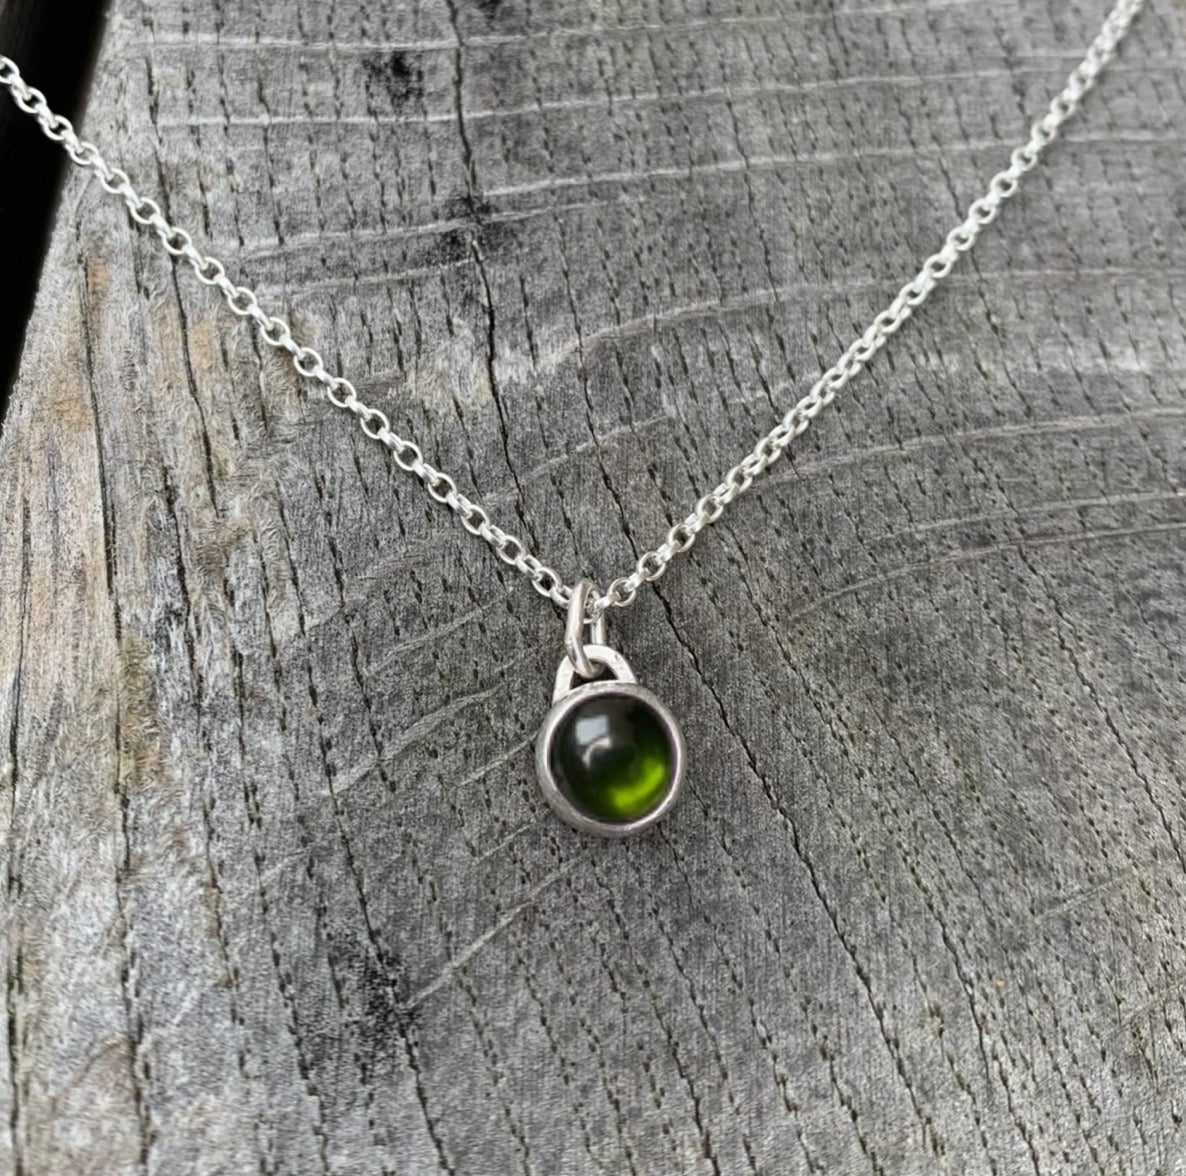 A green tourmaline stone set in silver on a sterling silver chain.